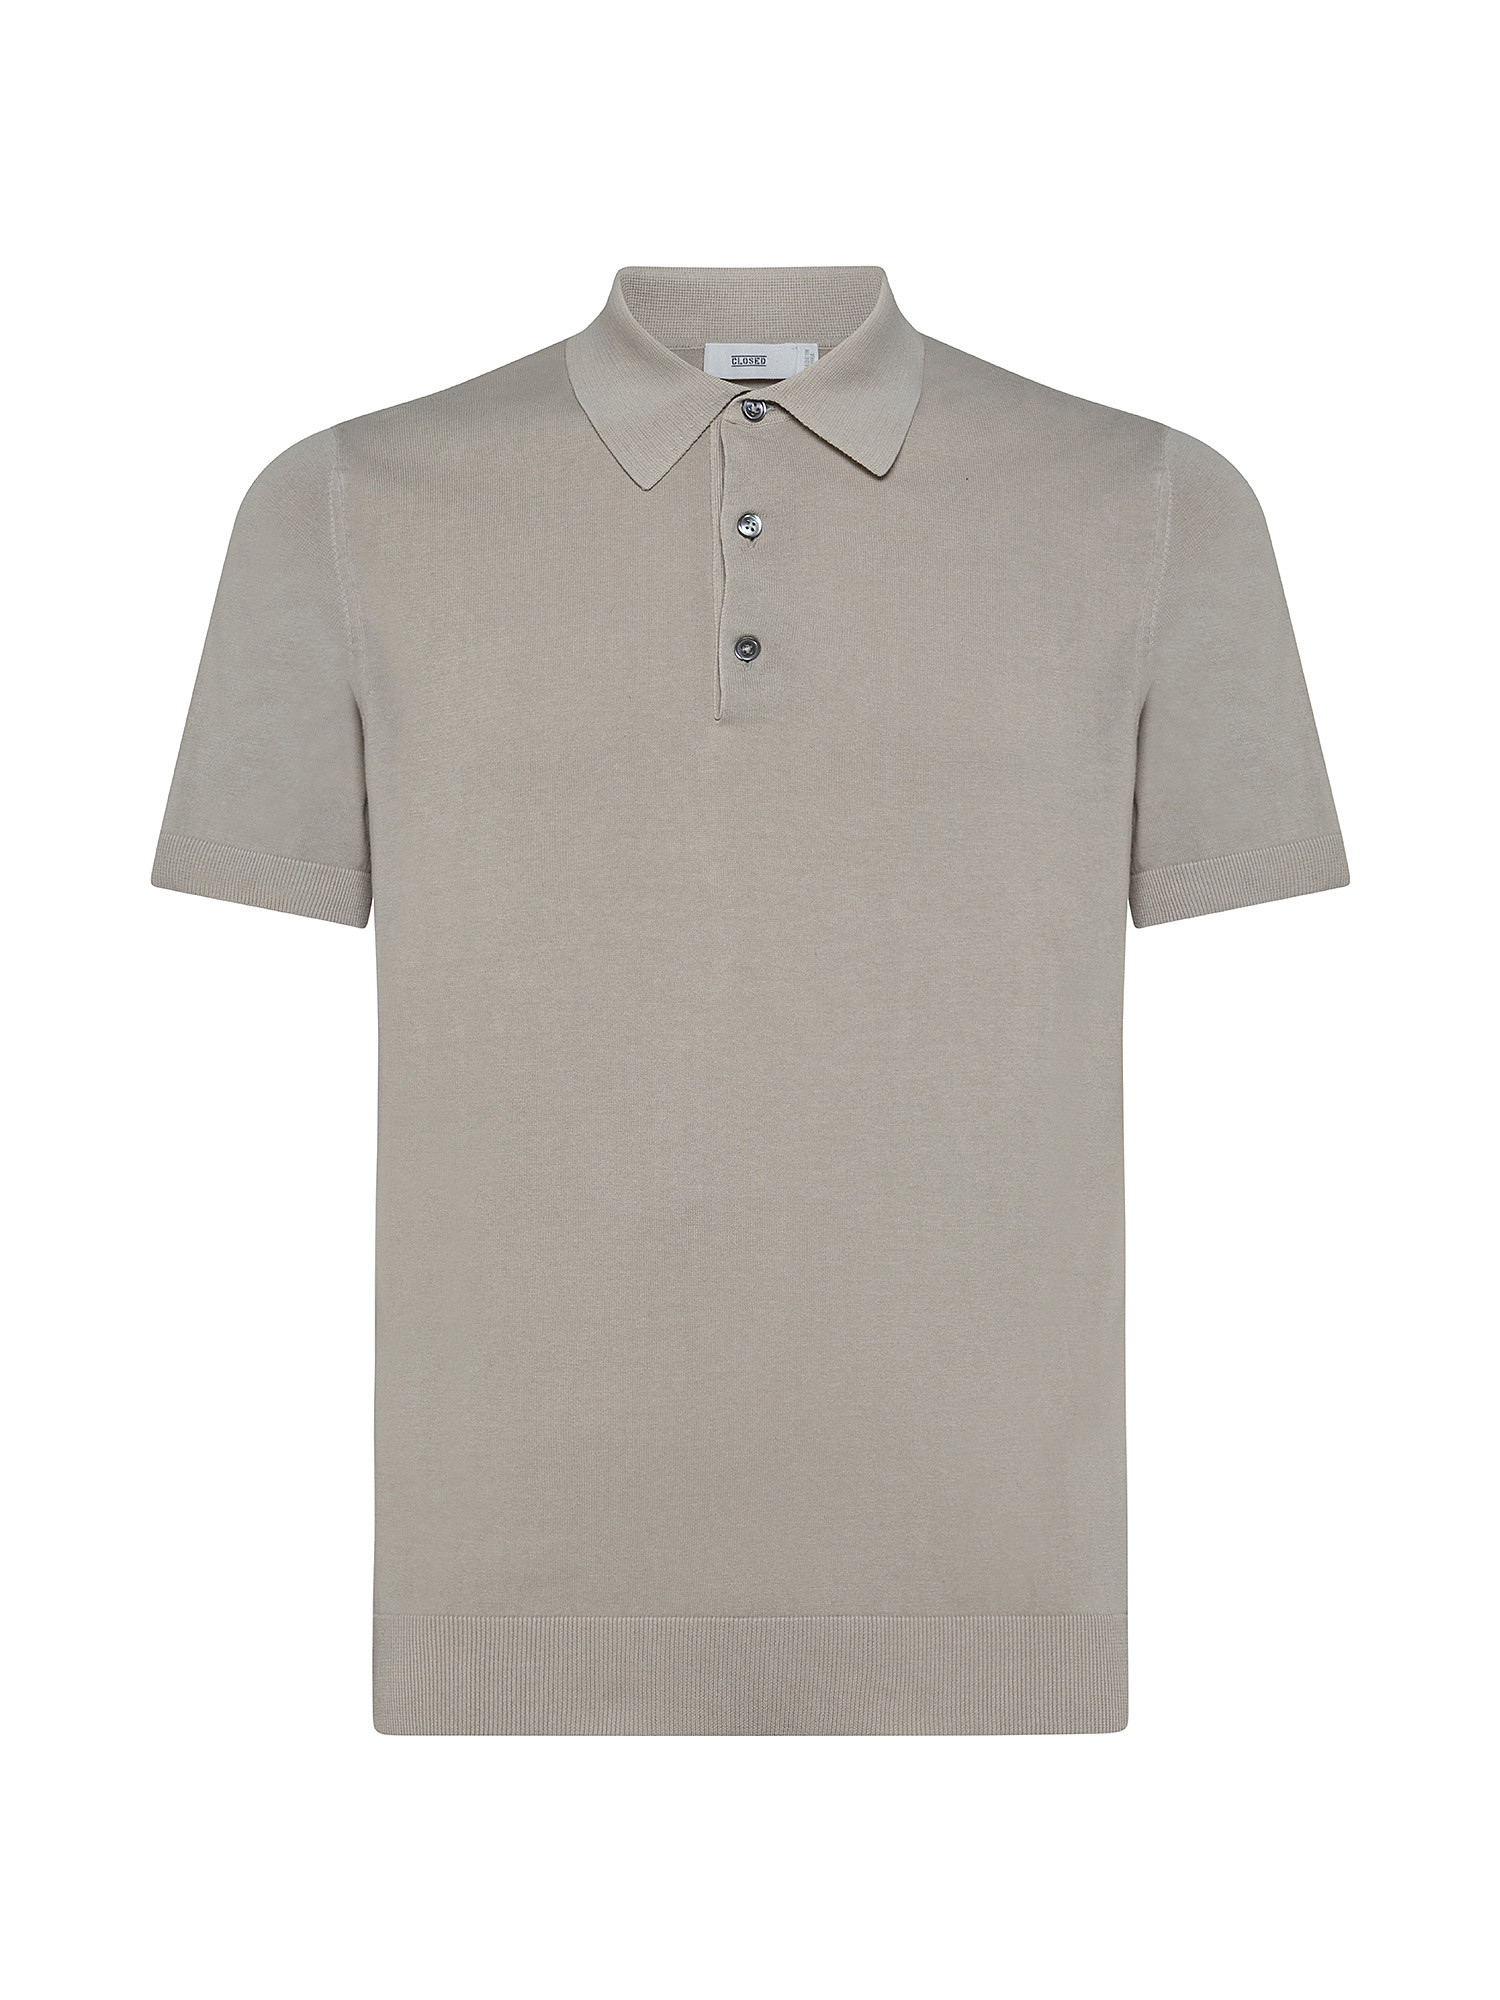 Cotton knit polo shirt, Light Grey, large image number 0